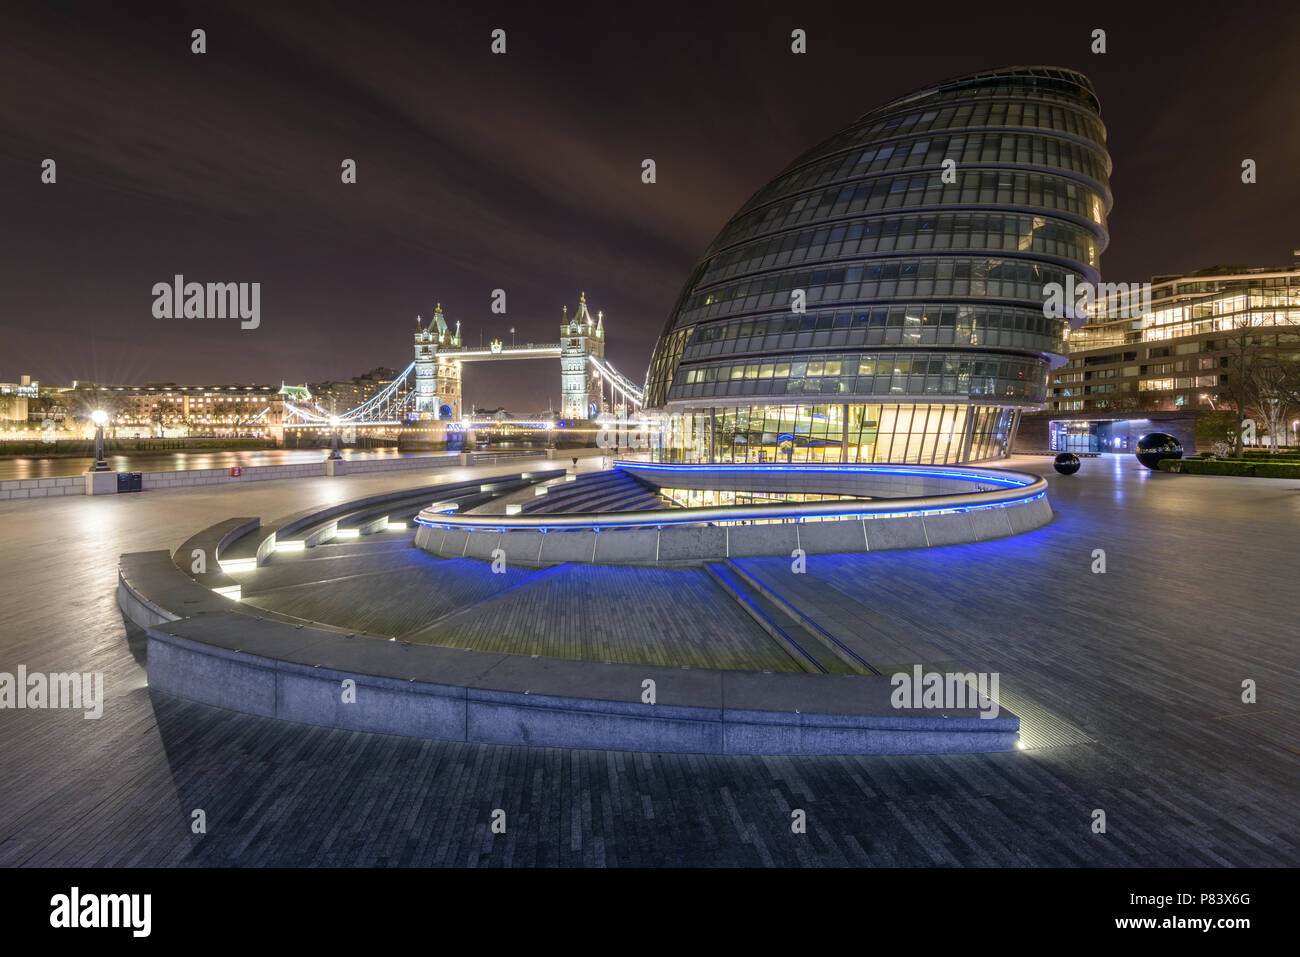 Meeting place at The Scoop amphitheatre at More London with City Hall and Tower Bridge lit up in blue and orange lights by the River Thames at night Stock Photo